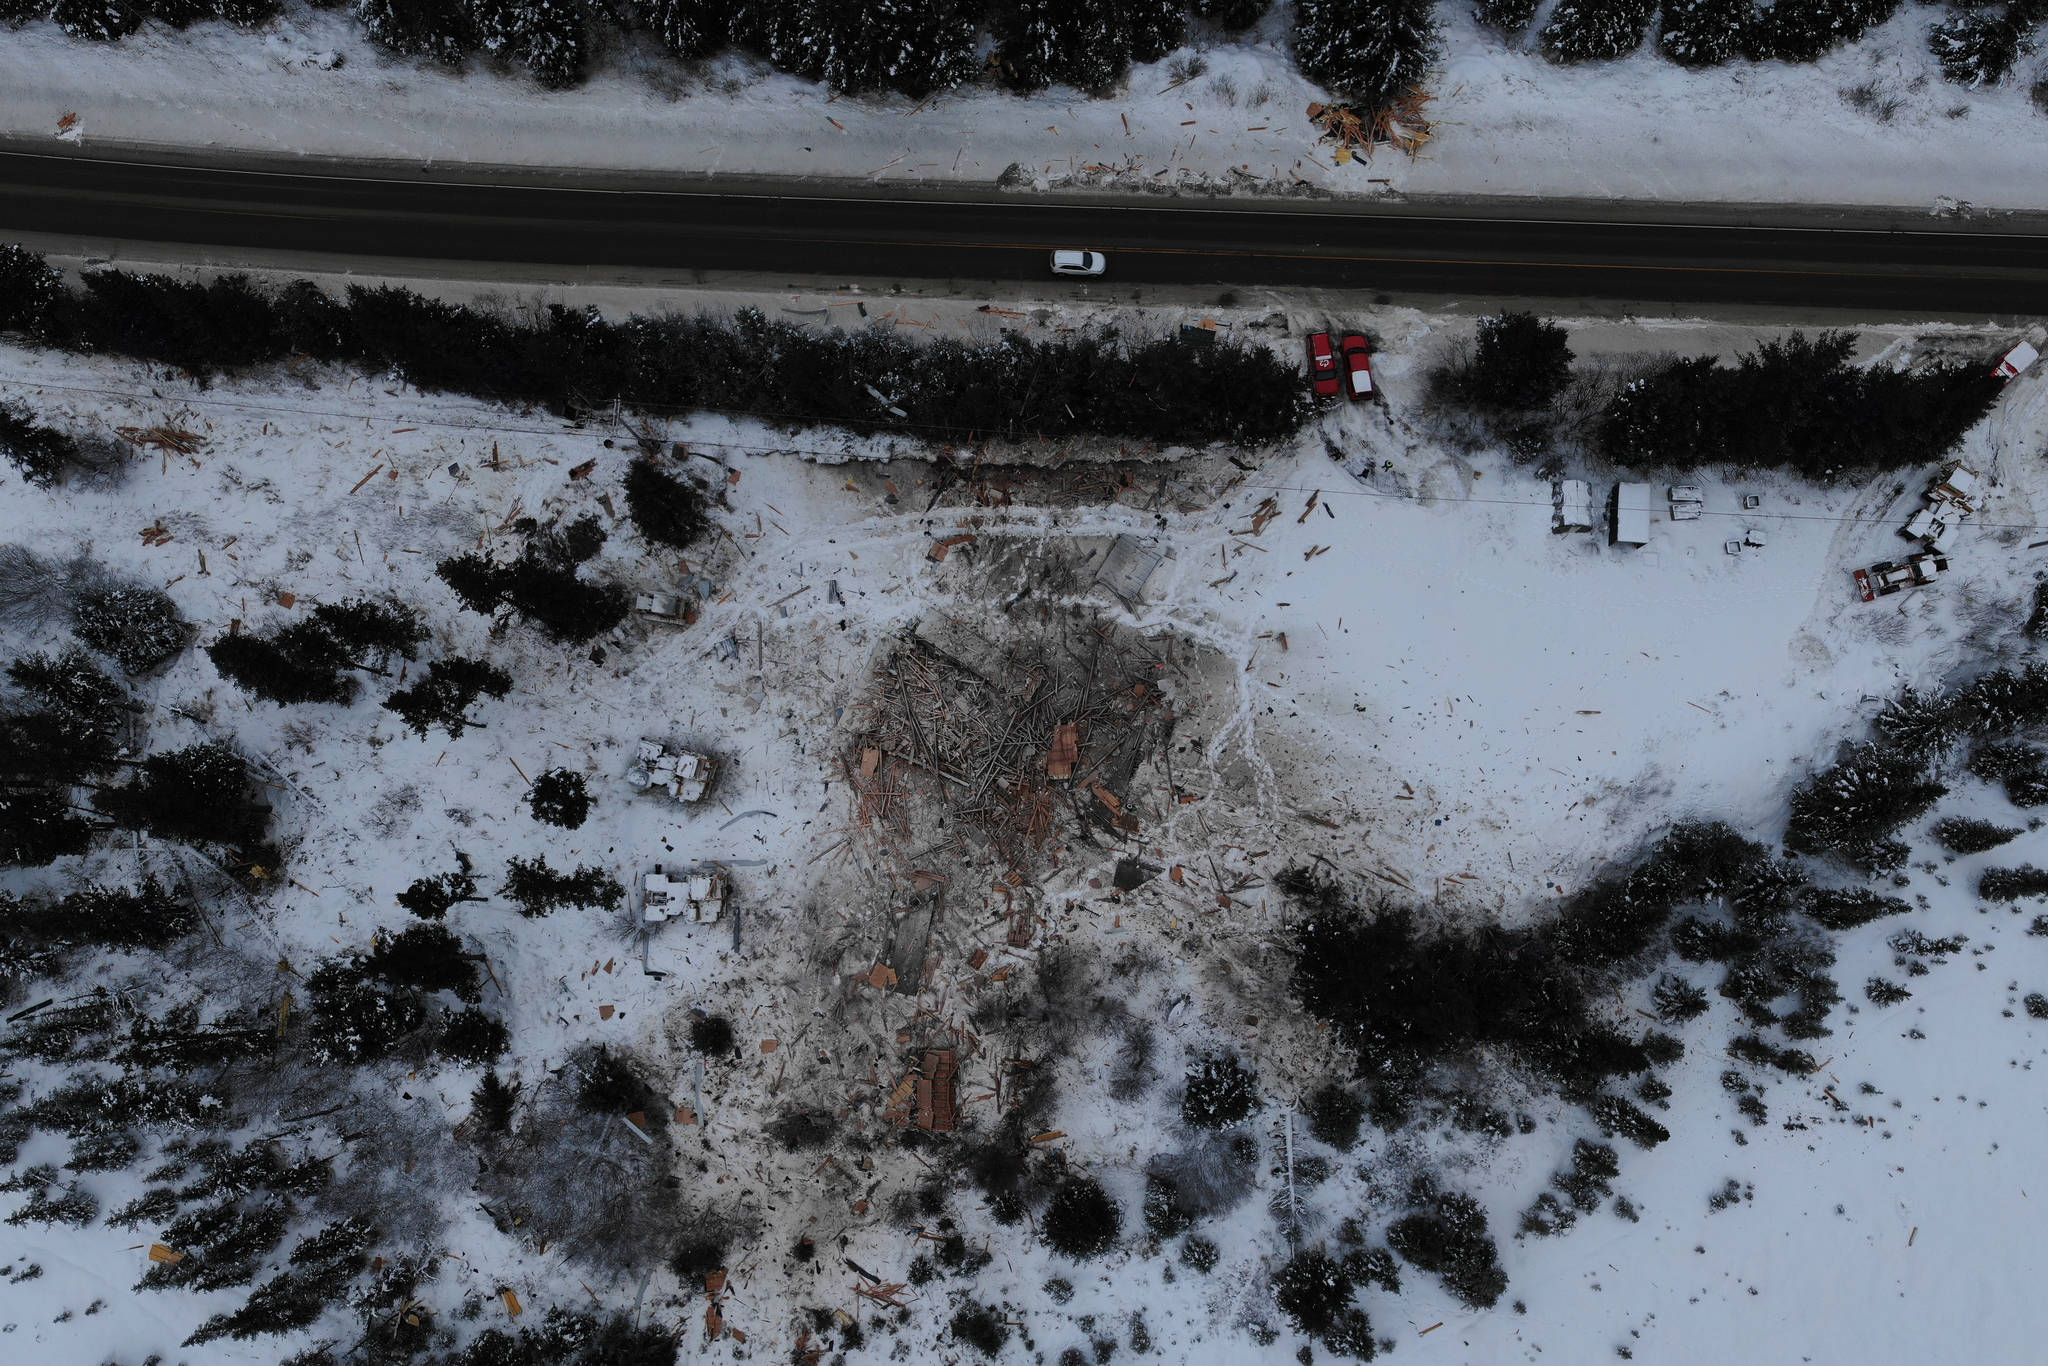 An aerial drone photo shows the extent of the explosion of a house that blew up on Dec. 27, 2018, near Mile 166 Sterling Highway in Homer, Alaska. (Photo by Travis Ogden/Kachemak Emergency Services)